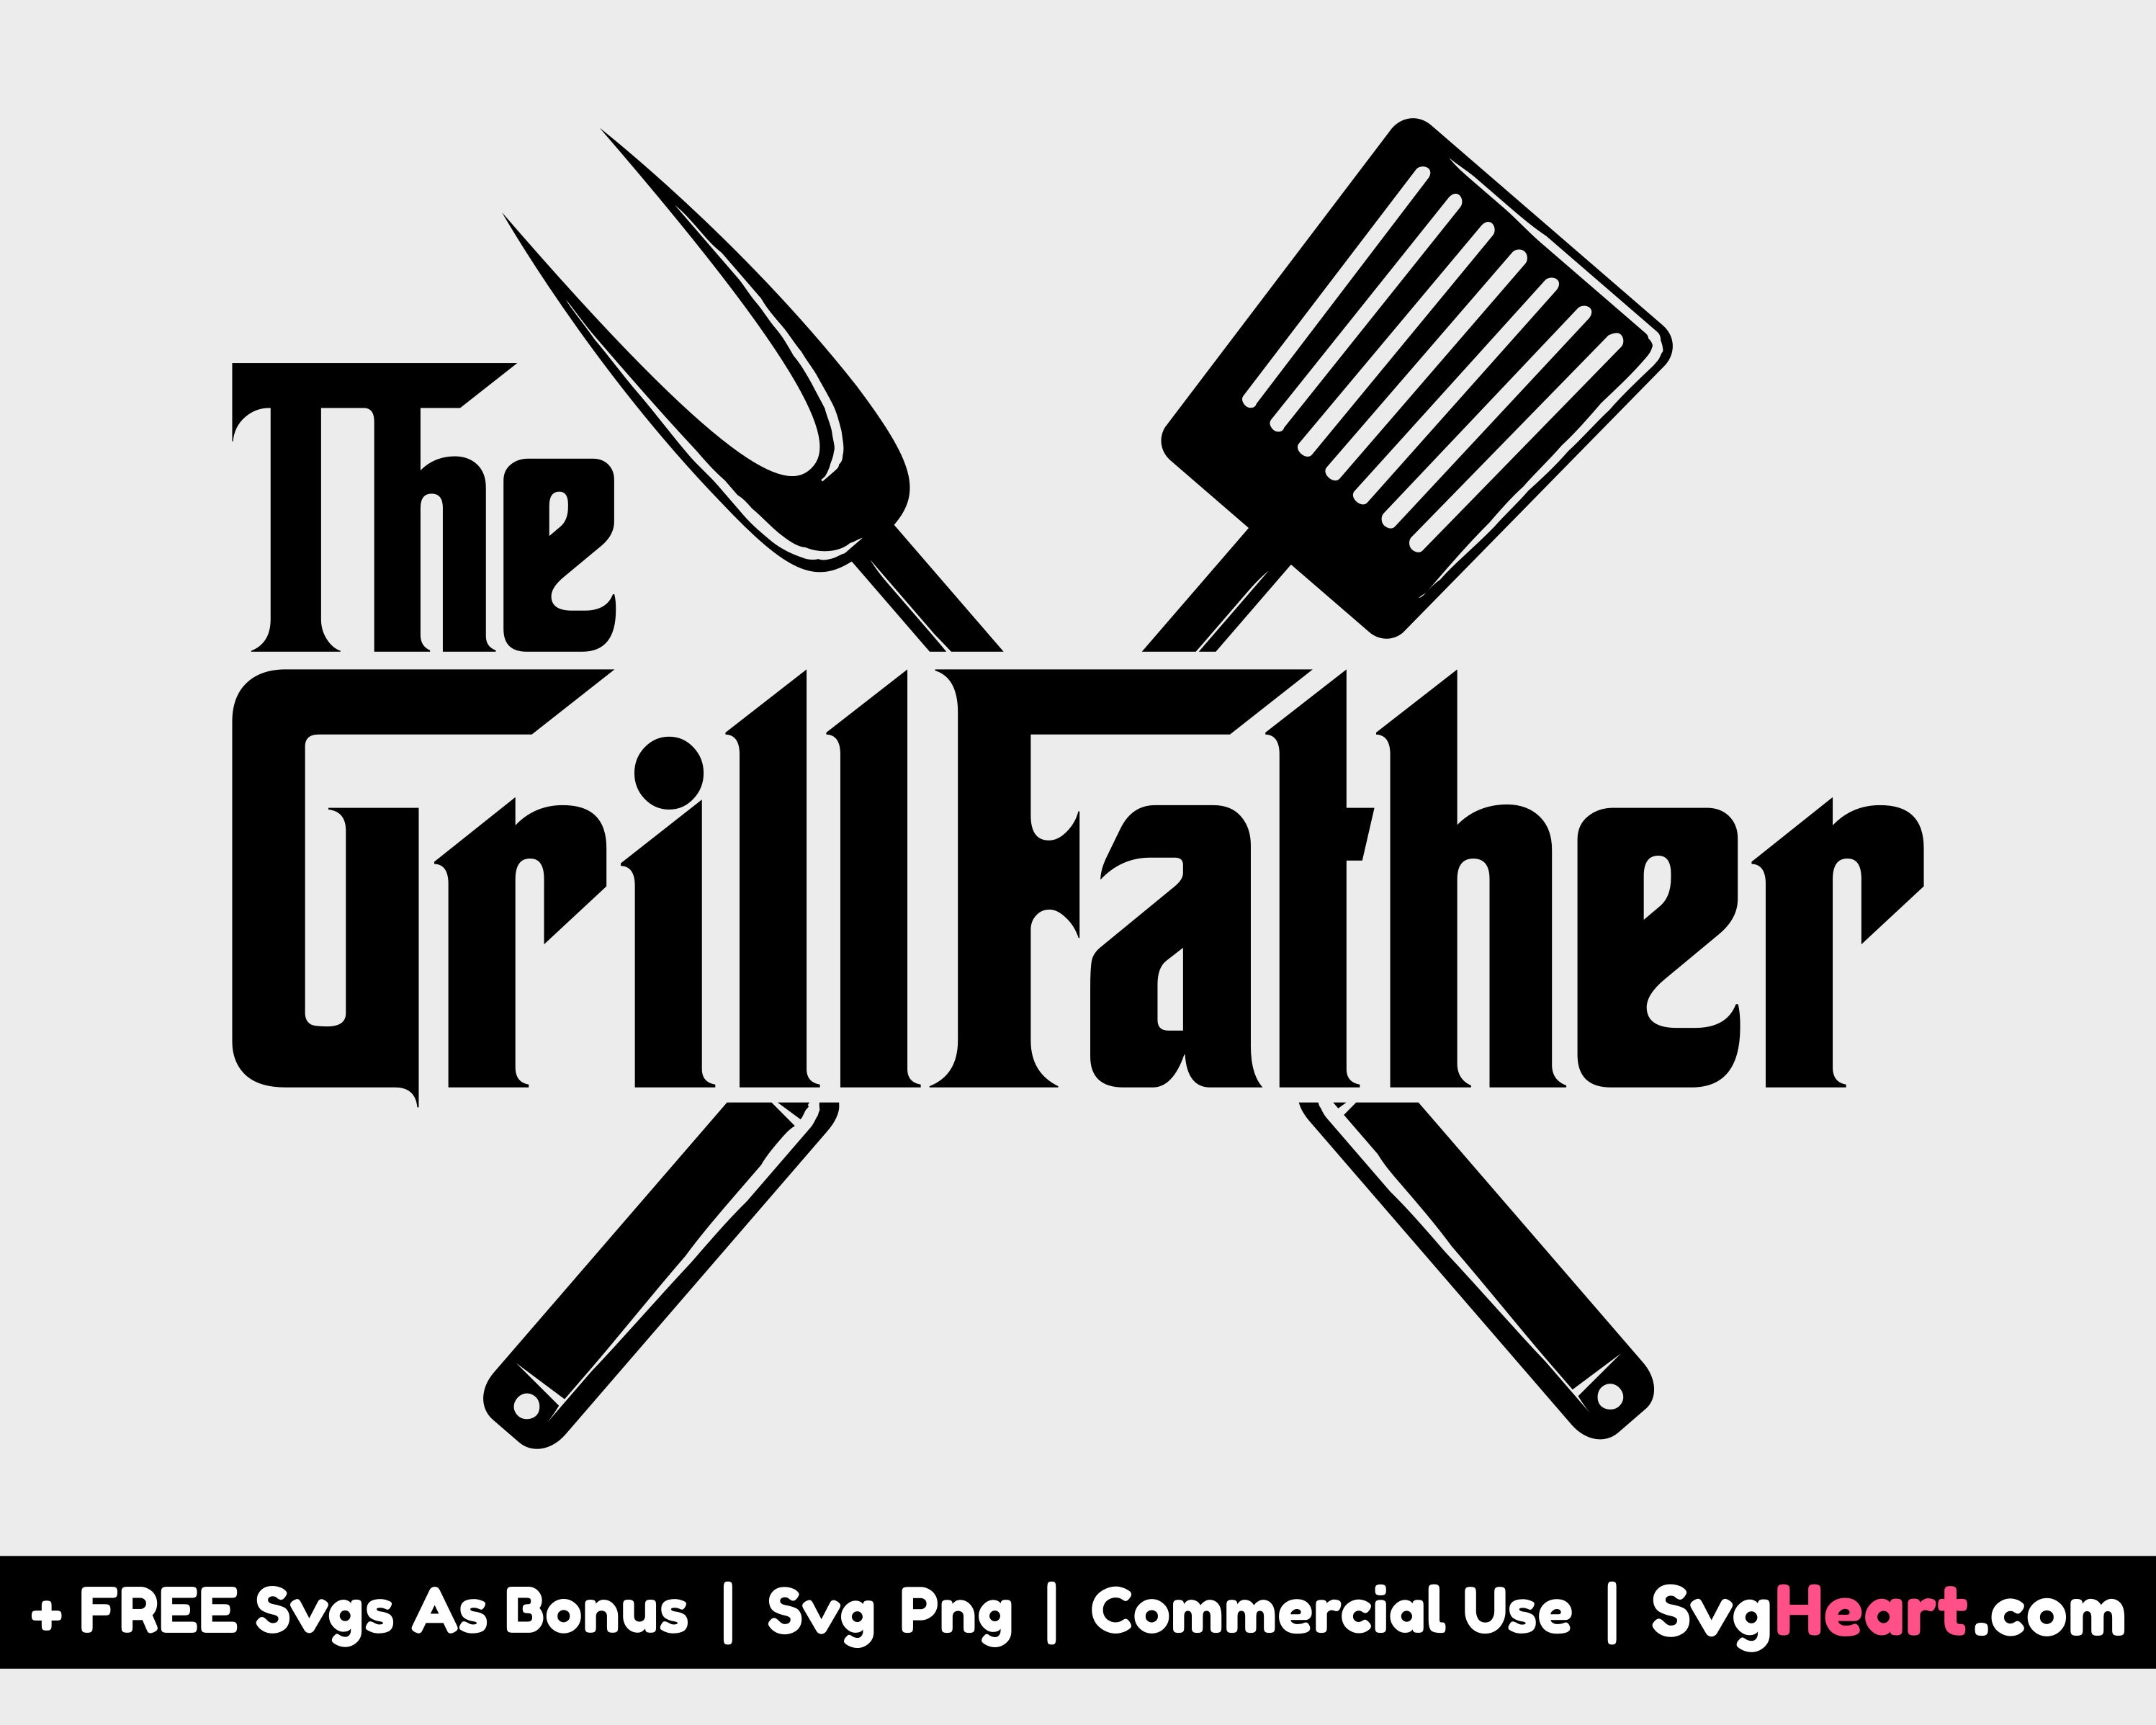 Anemone fisk Styre Perth The Grill Father Svg Files for Cricut Grill Master Svg - Etsy